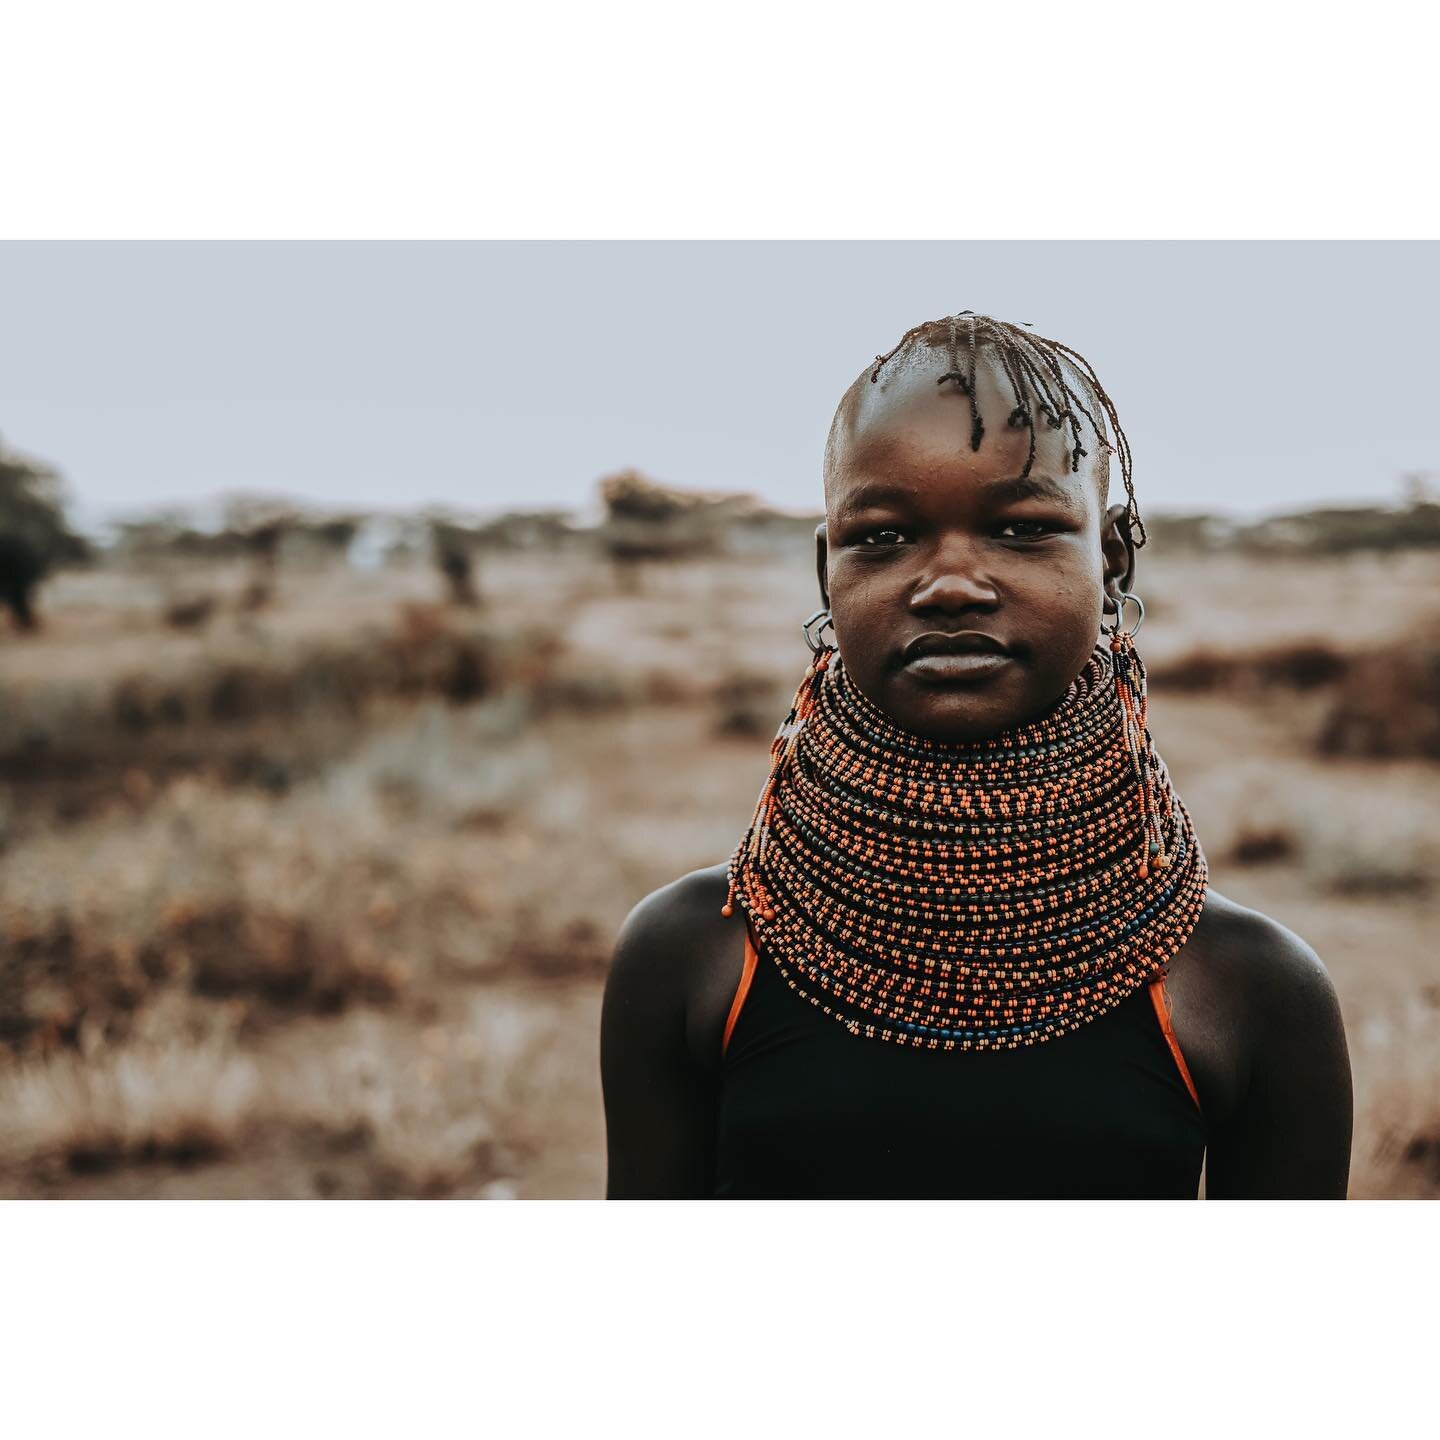 A young woman named Ilayok takes a break from gathering wood before helping repairing a boma fence. Like many cultures, Turkana women in this village are the architects &amp; the backbone of the community - in charge of constructing the community&rsq